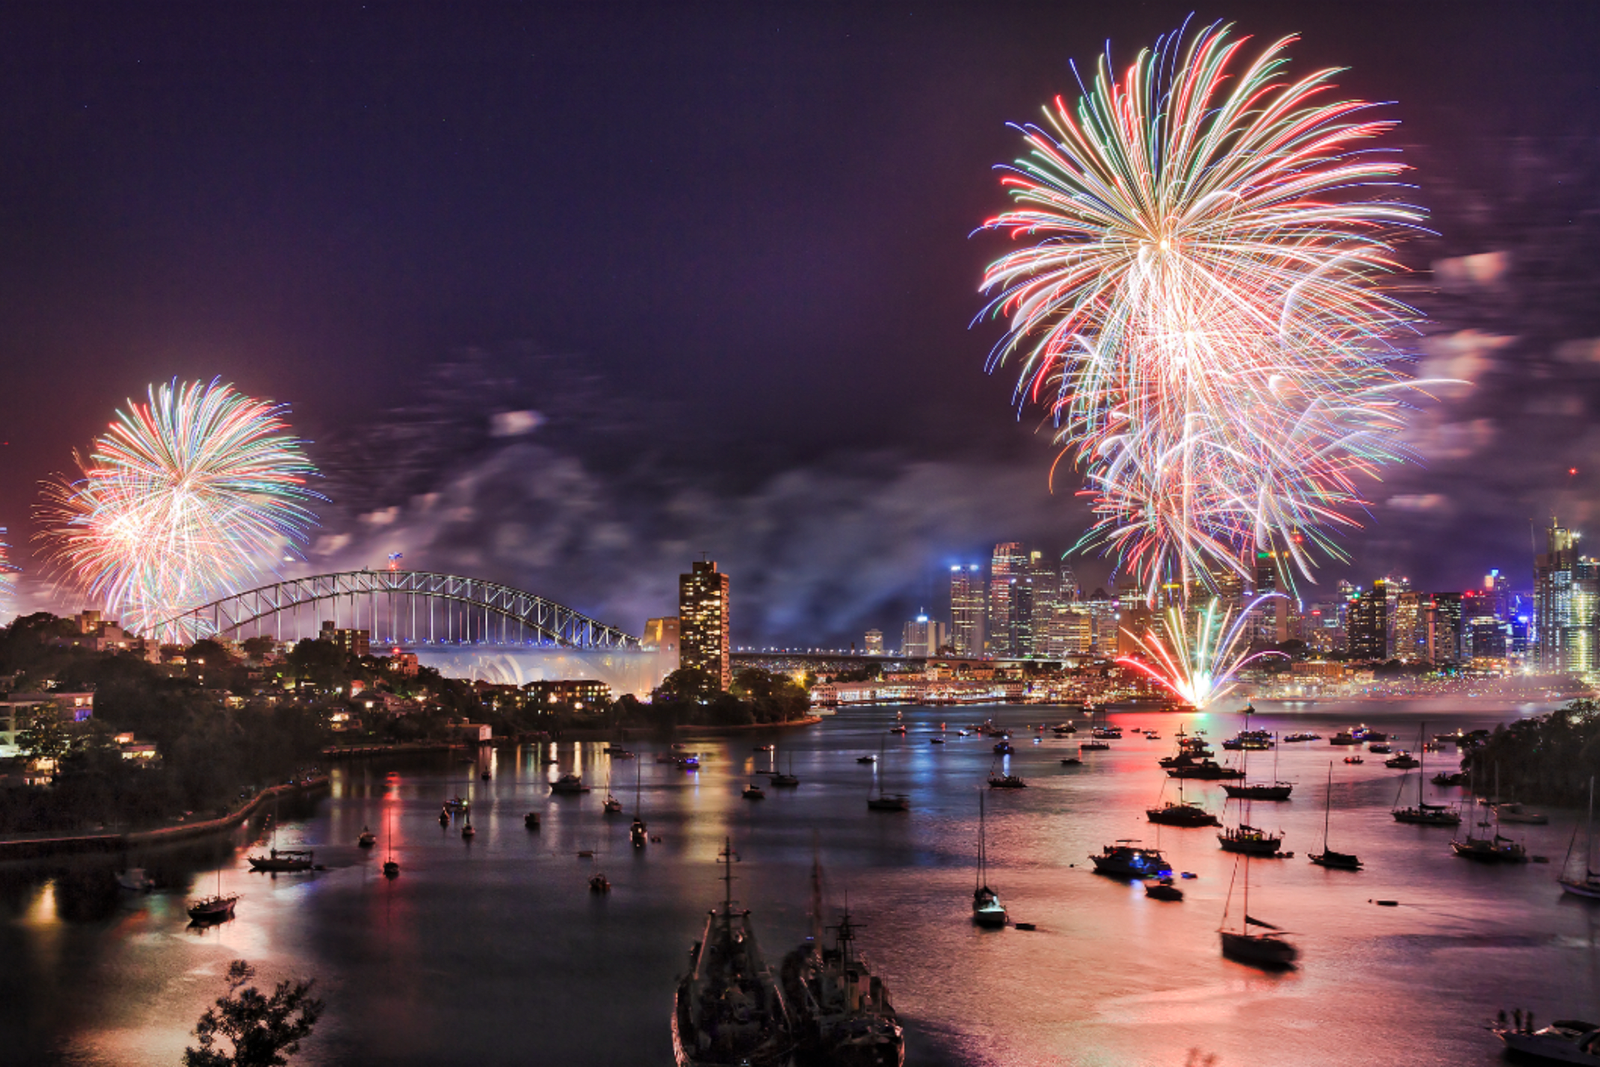 Sydney New Year's Eve fireworks over Harbour with bridge and city